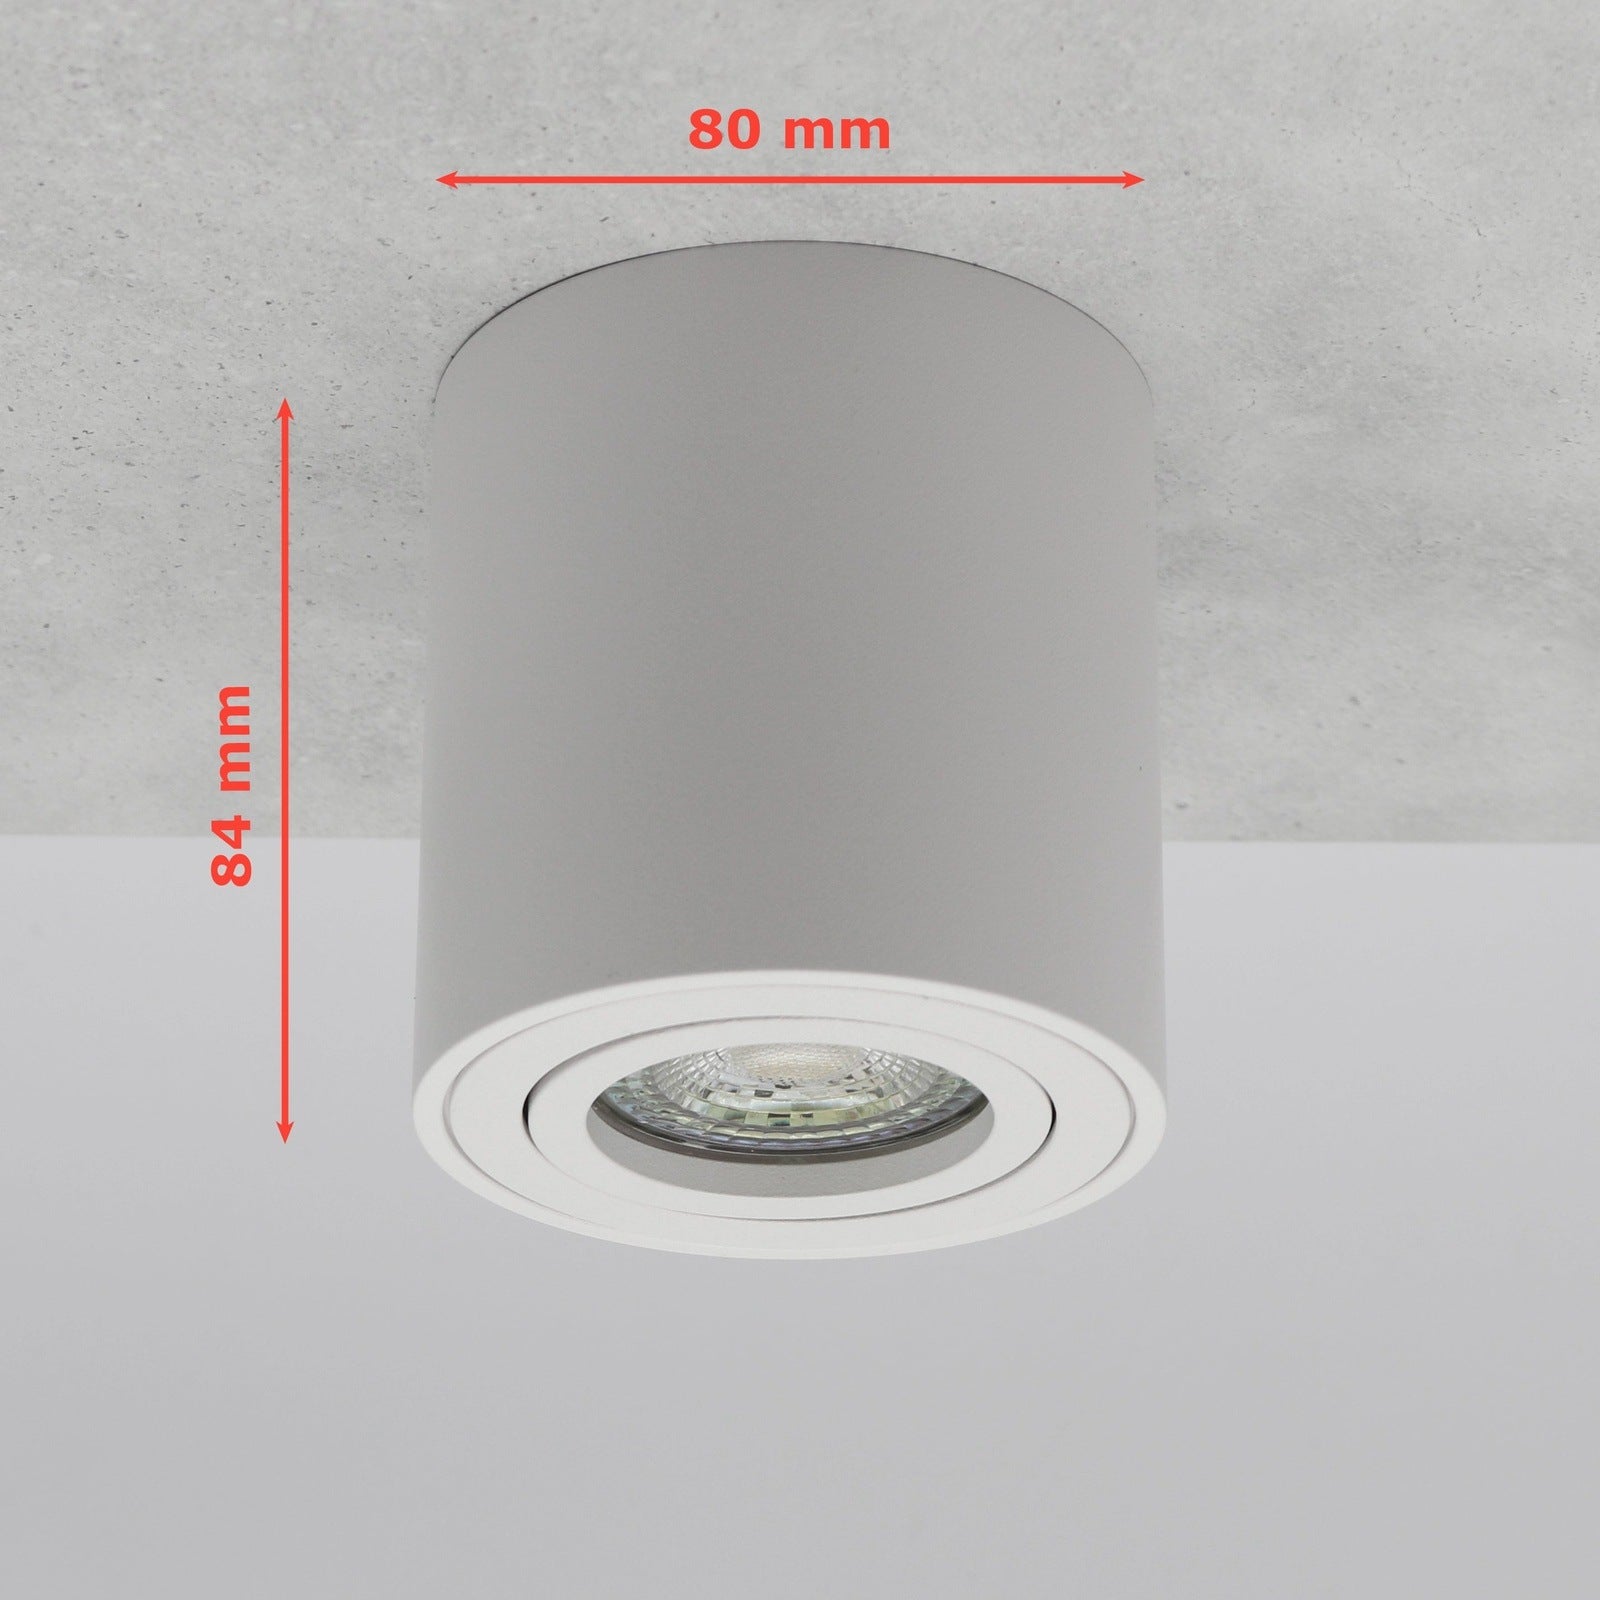 LED surface-mounted spotlight GU10 6.2W 230V Milano ceiling Black light novoom light Surface-mounted Round – Dimmable